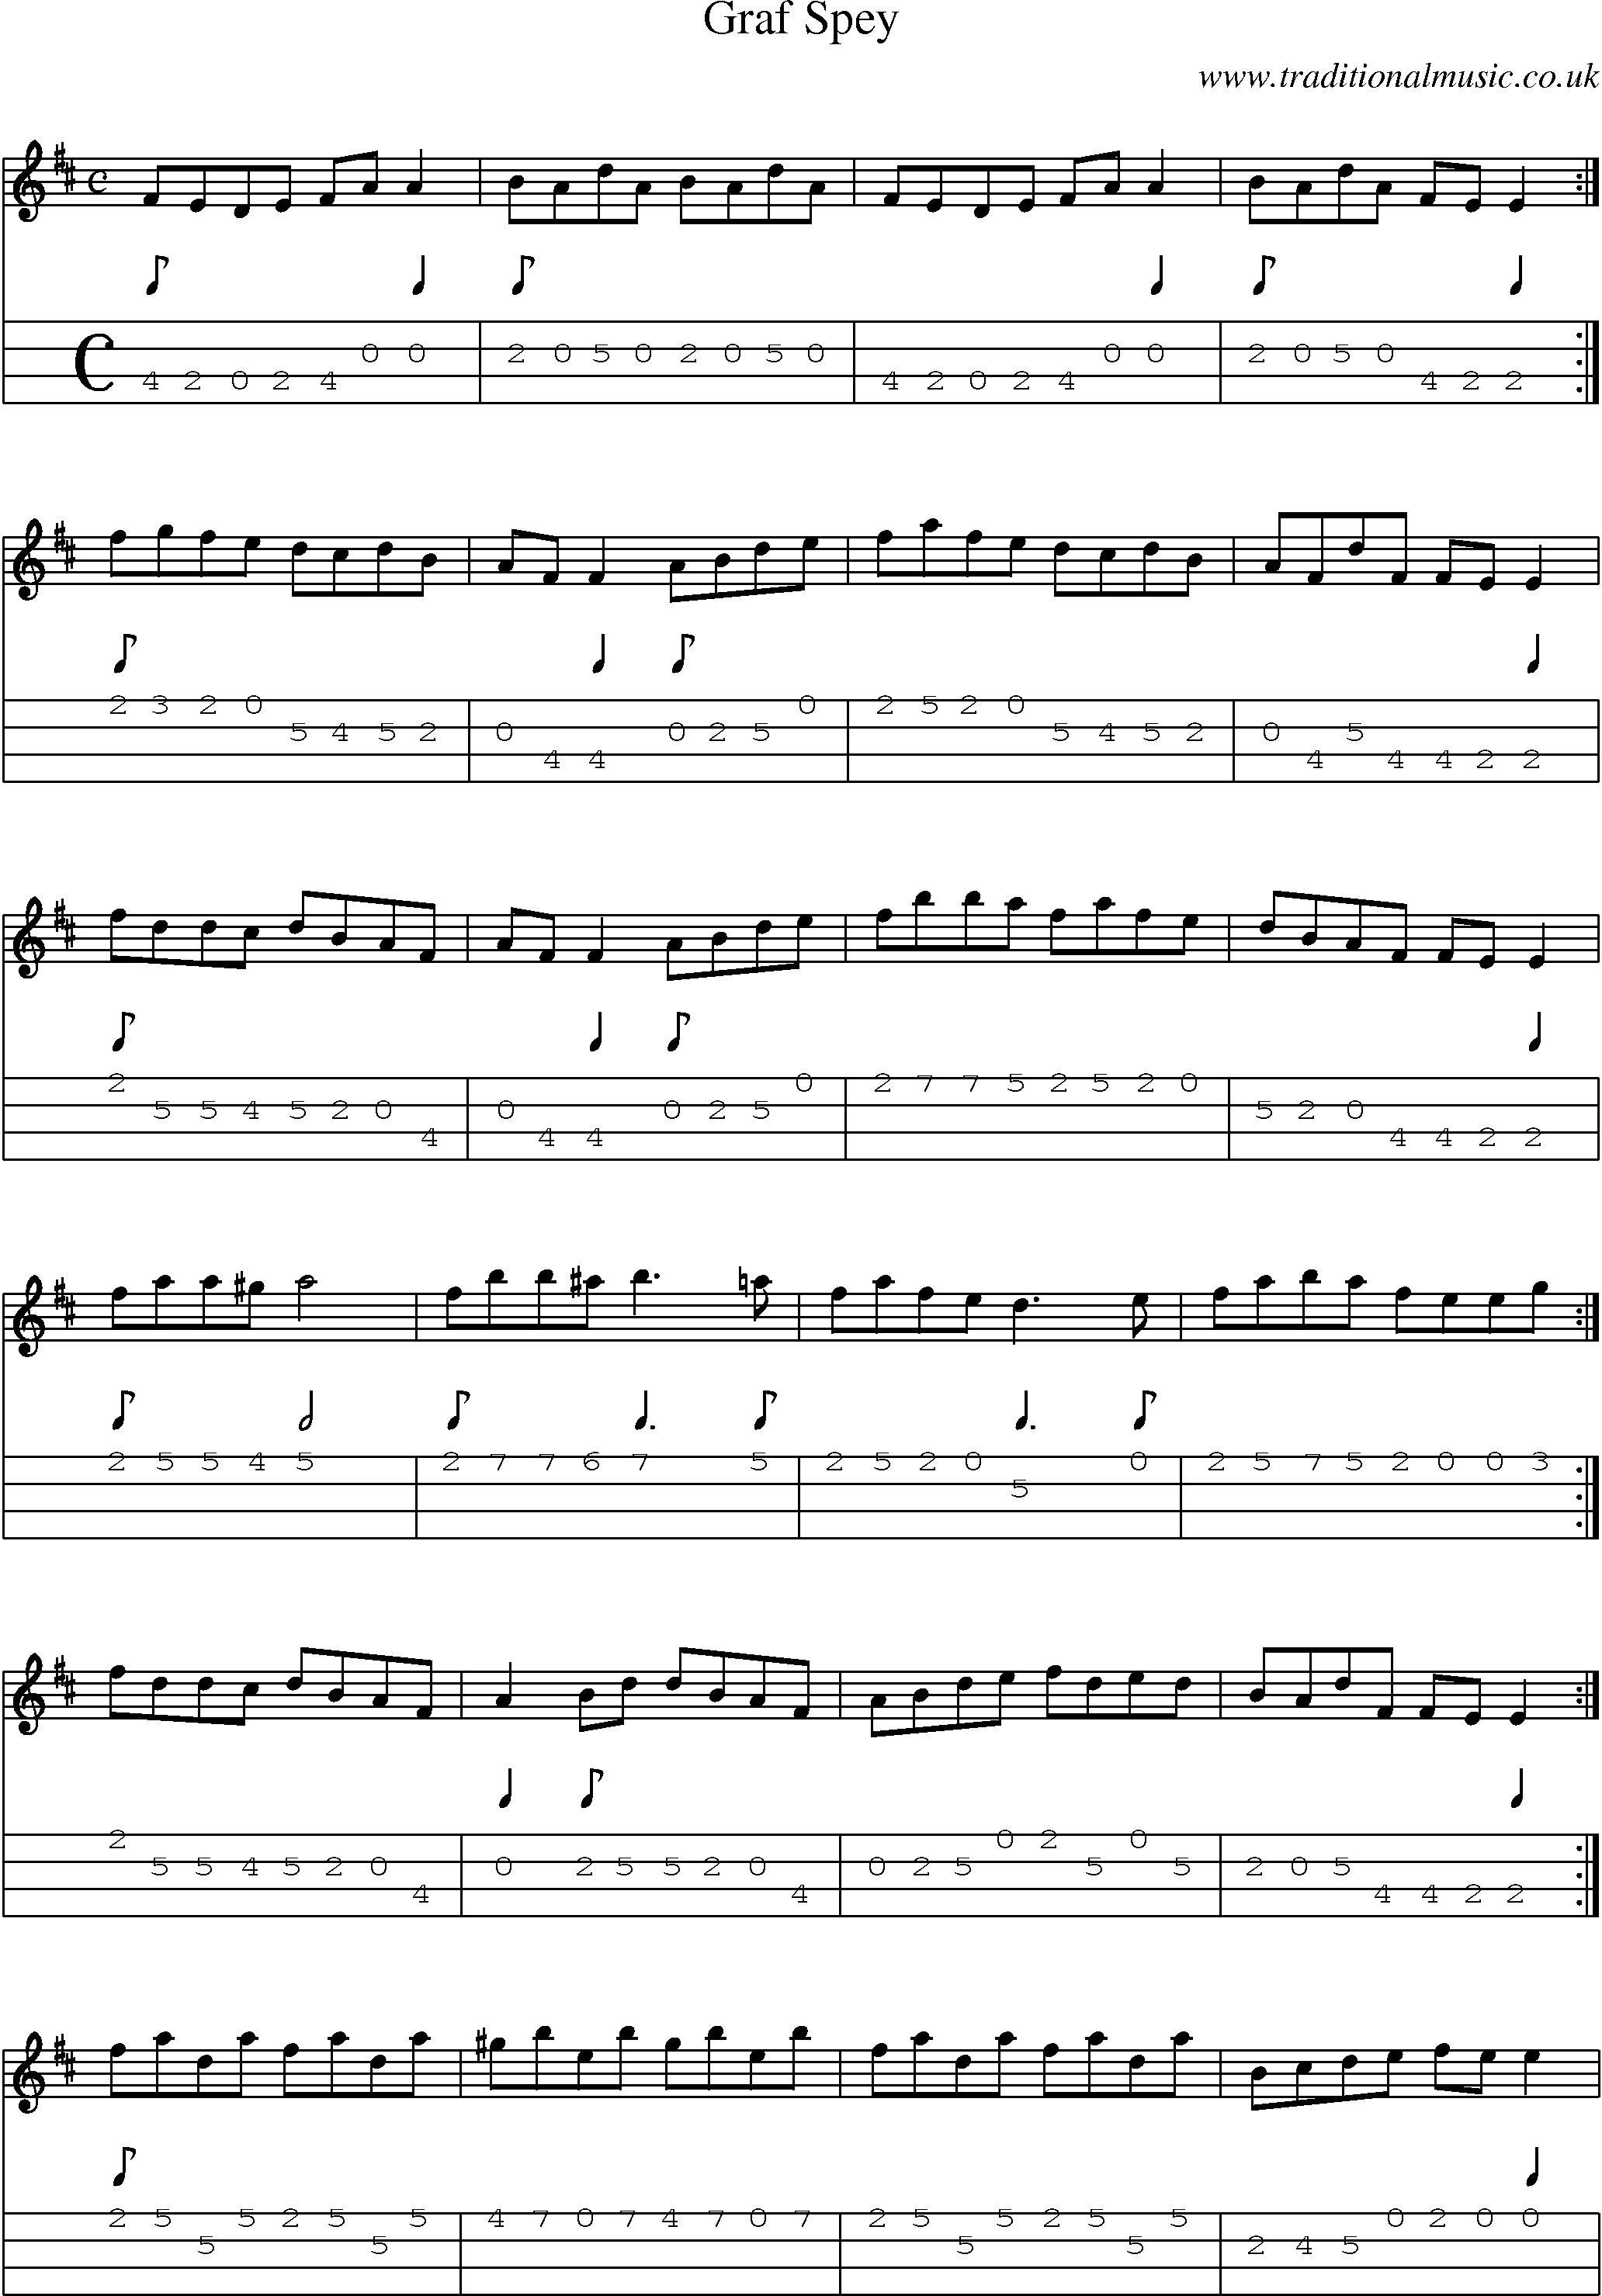 Music Score and Mandolin Tabs for Graf Spey